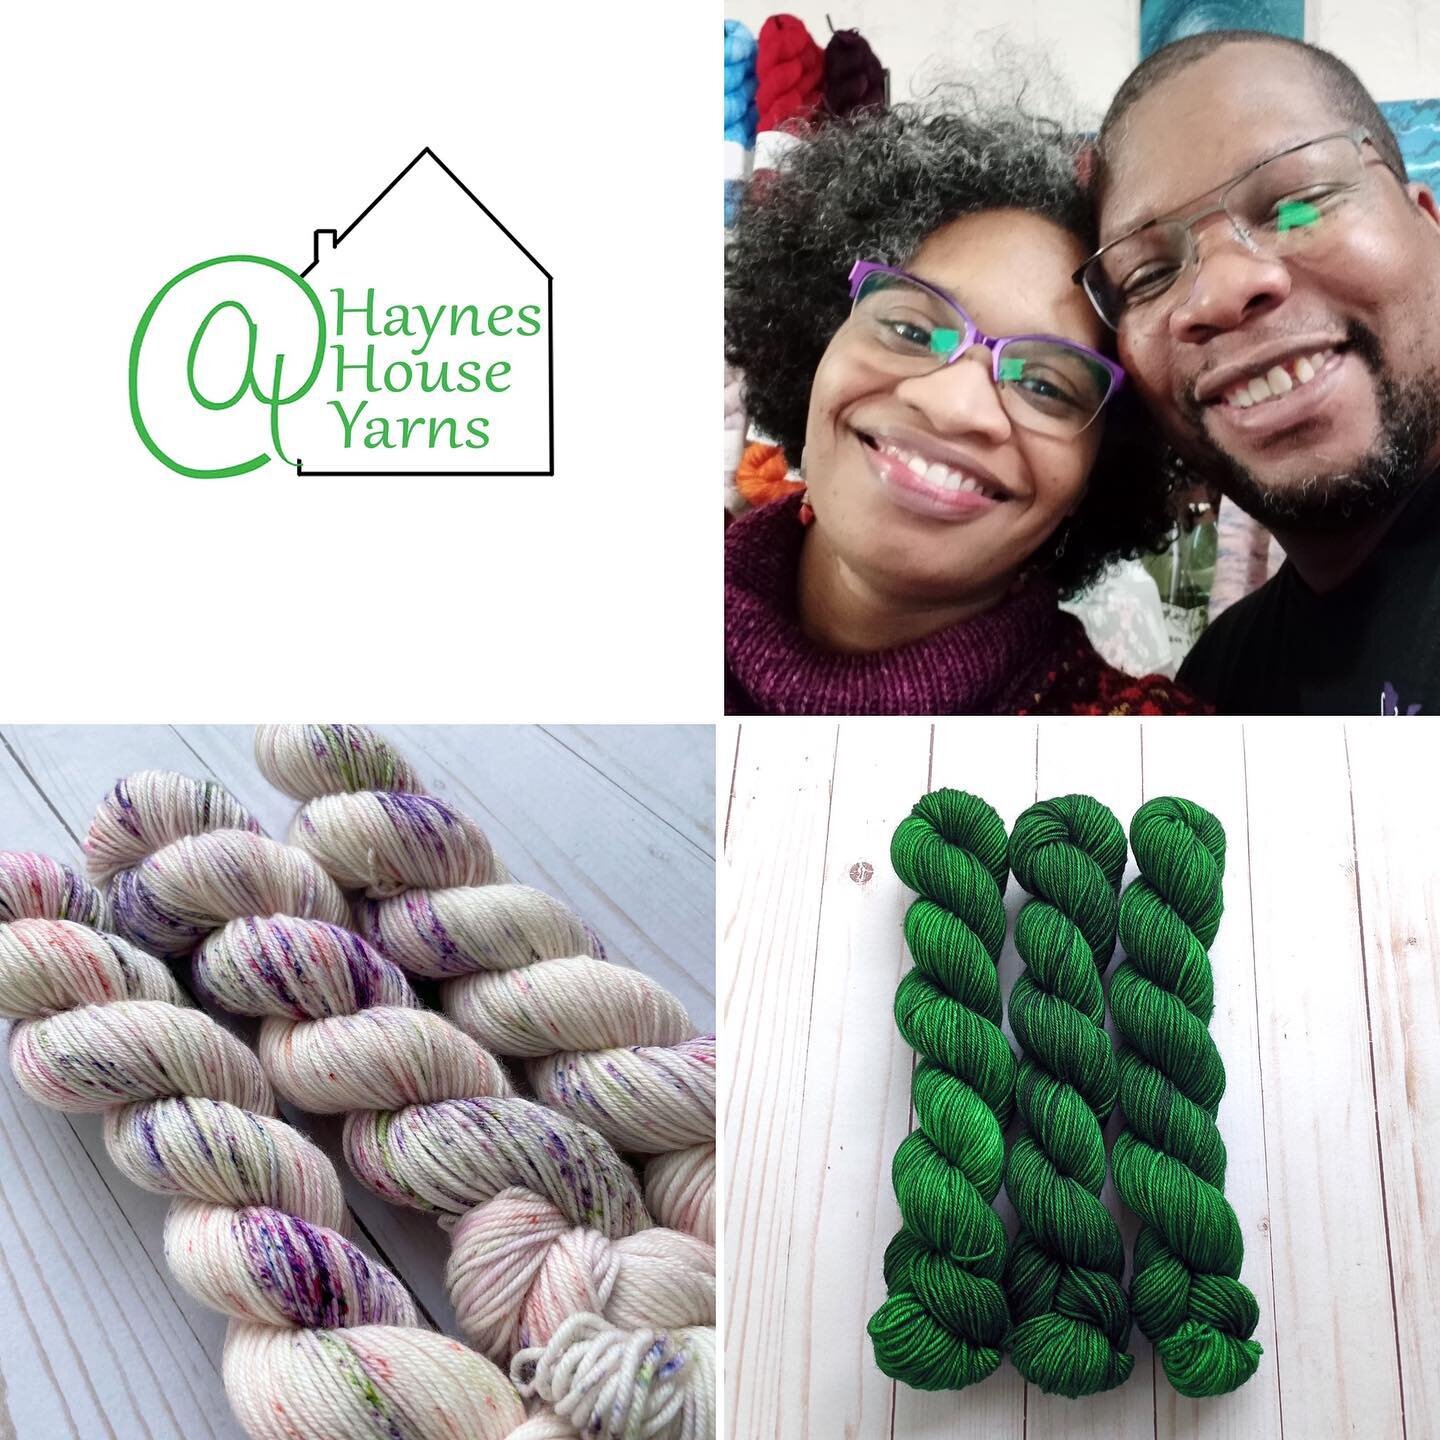 Hey! We&rsquo;re having a trunk show this weekend with @at.haynes.house.yarns! We will be at The Brain, Body, Mind Place in Marietta with their gorgeous selection of yarn. Come by and see us and let&rsquo;s plan your next project! 😍
.
🧶 
If you&rsq